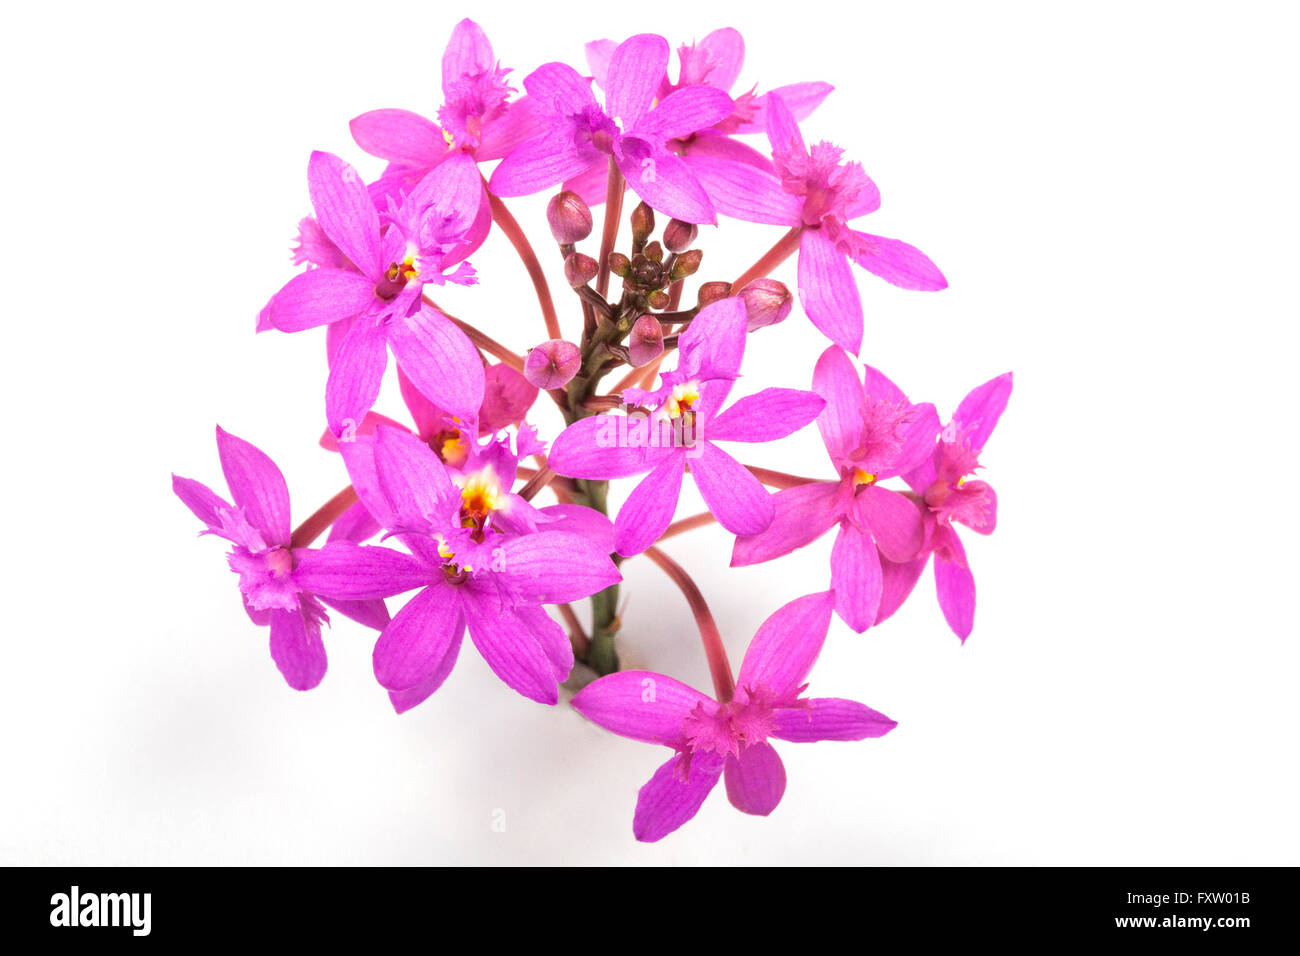 Head of tiny pink epidendrum orchids and buds on white Stock Photo